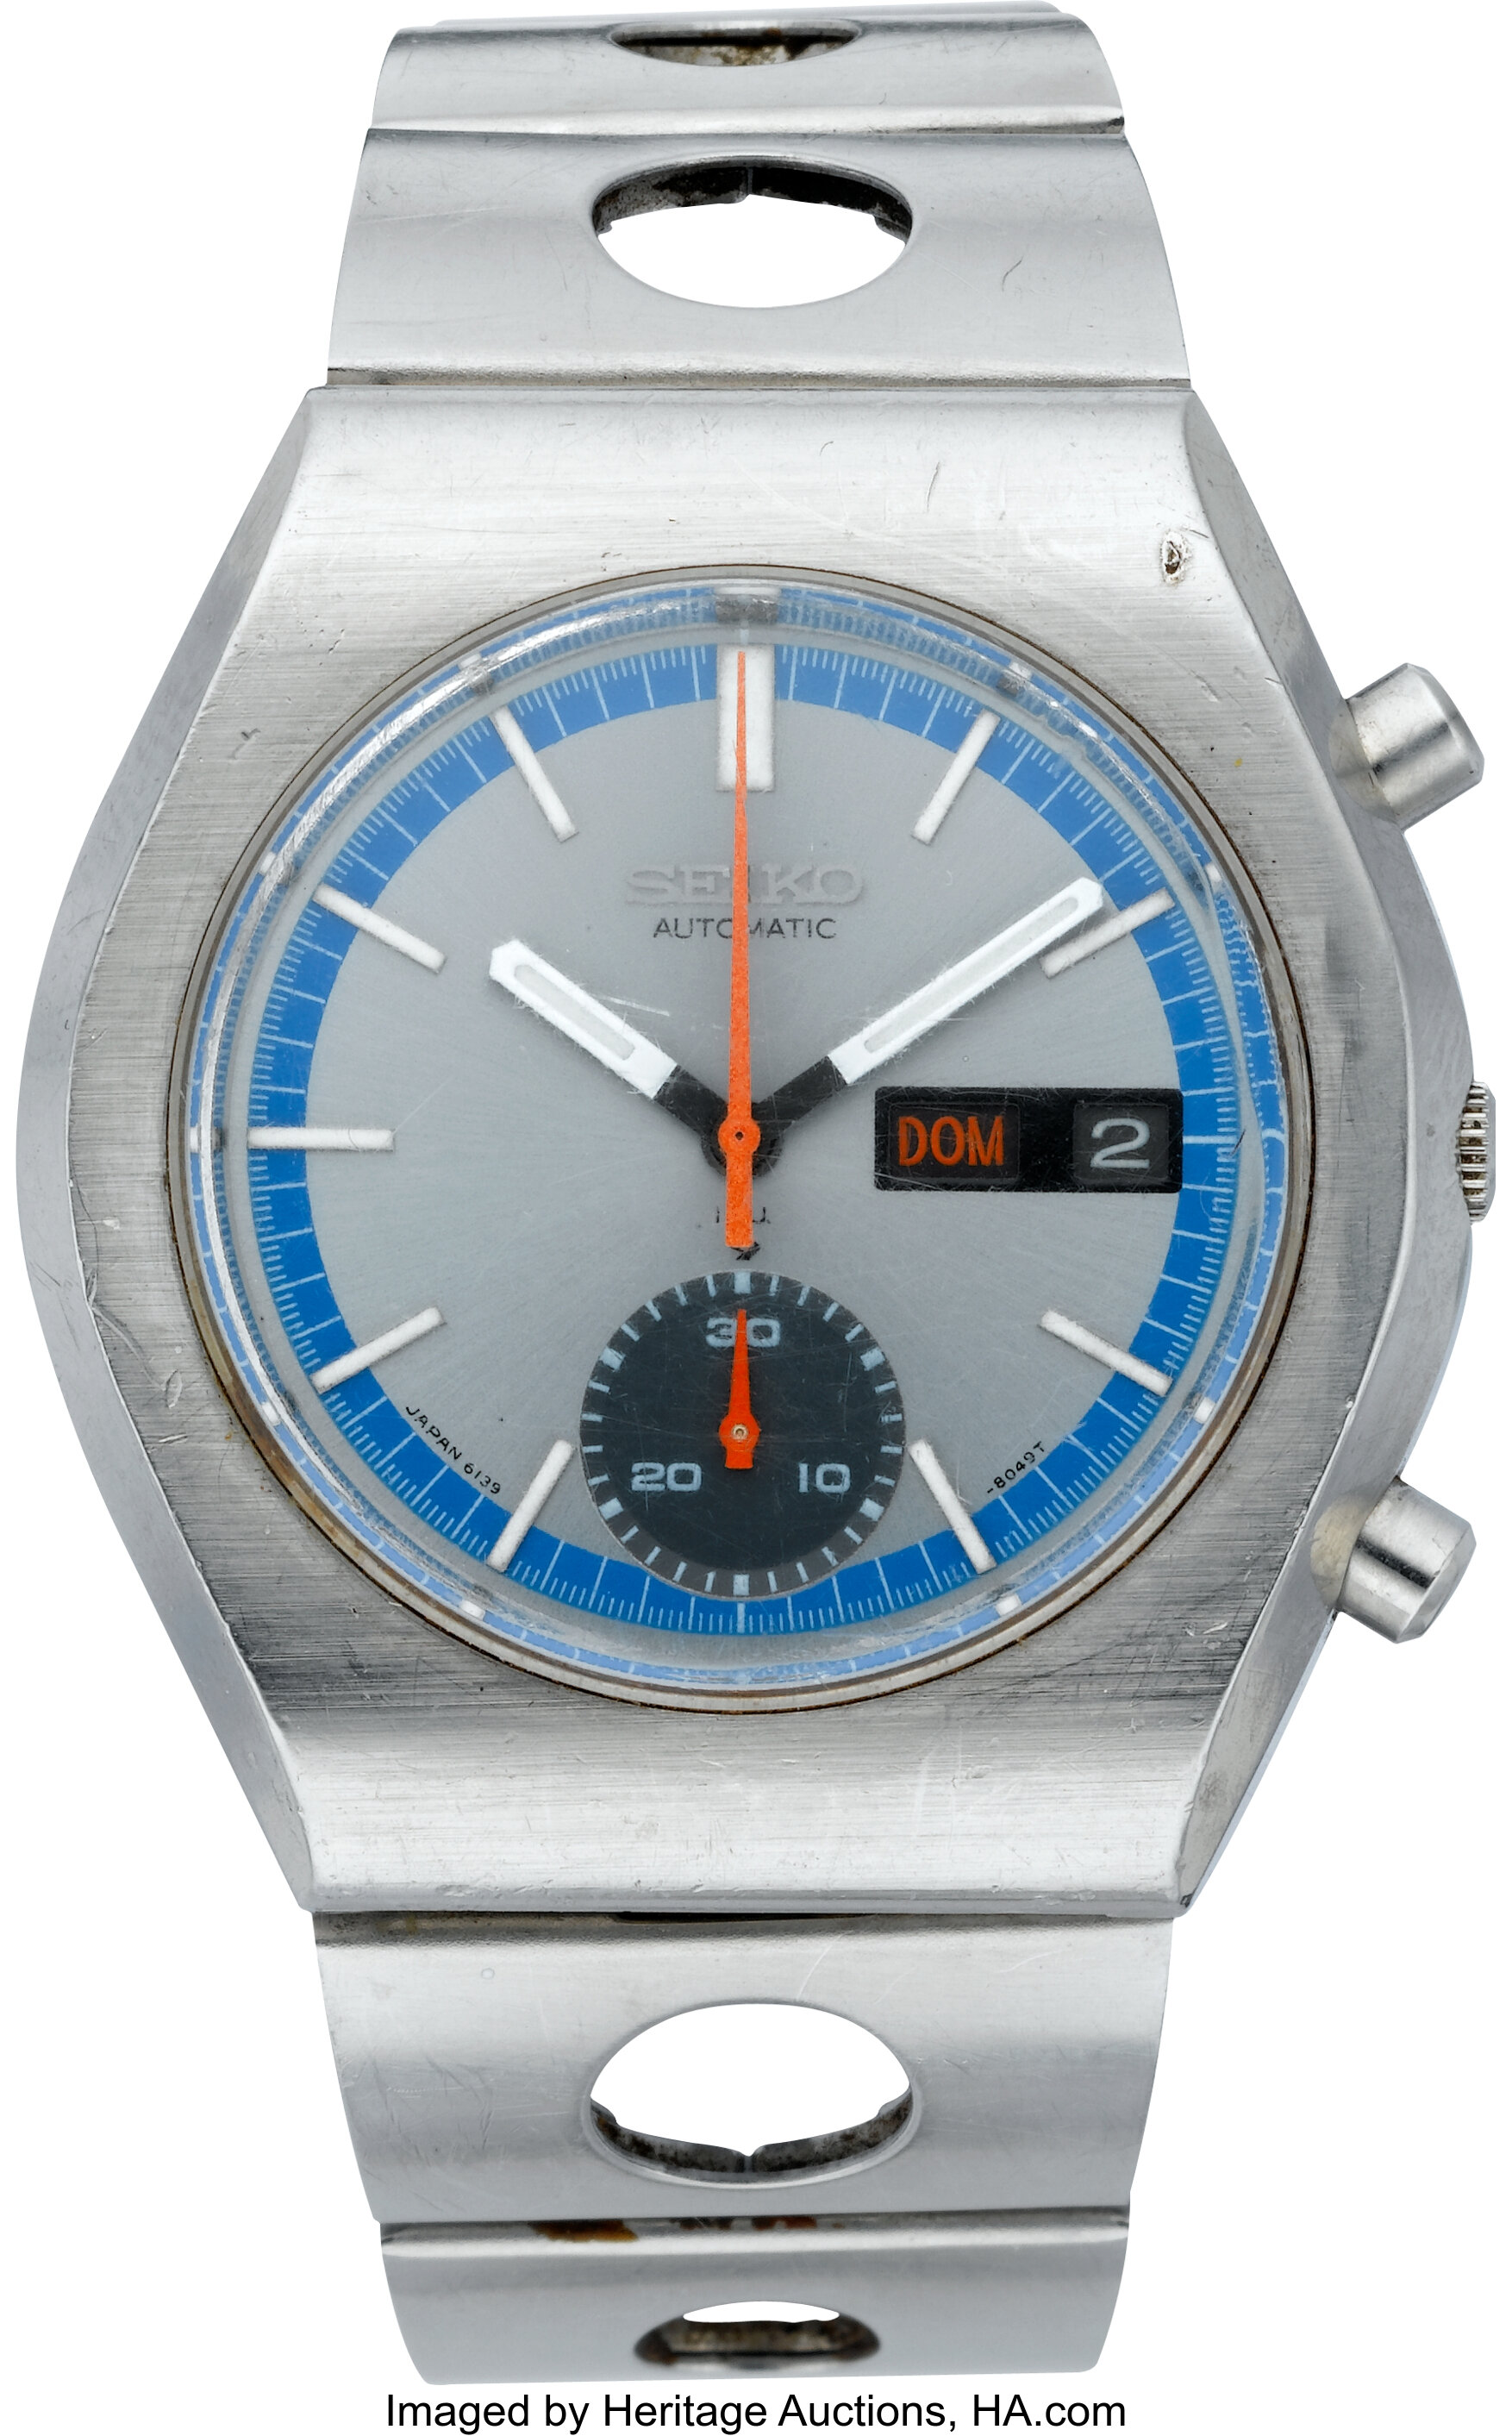 Seiko Time Corp. Vintage 6139 Automatic Chronograph, circa 1970. | Lot  #61242 | Heritage Auctions